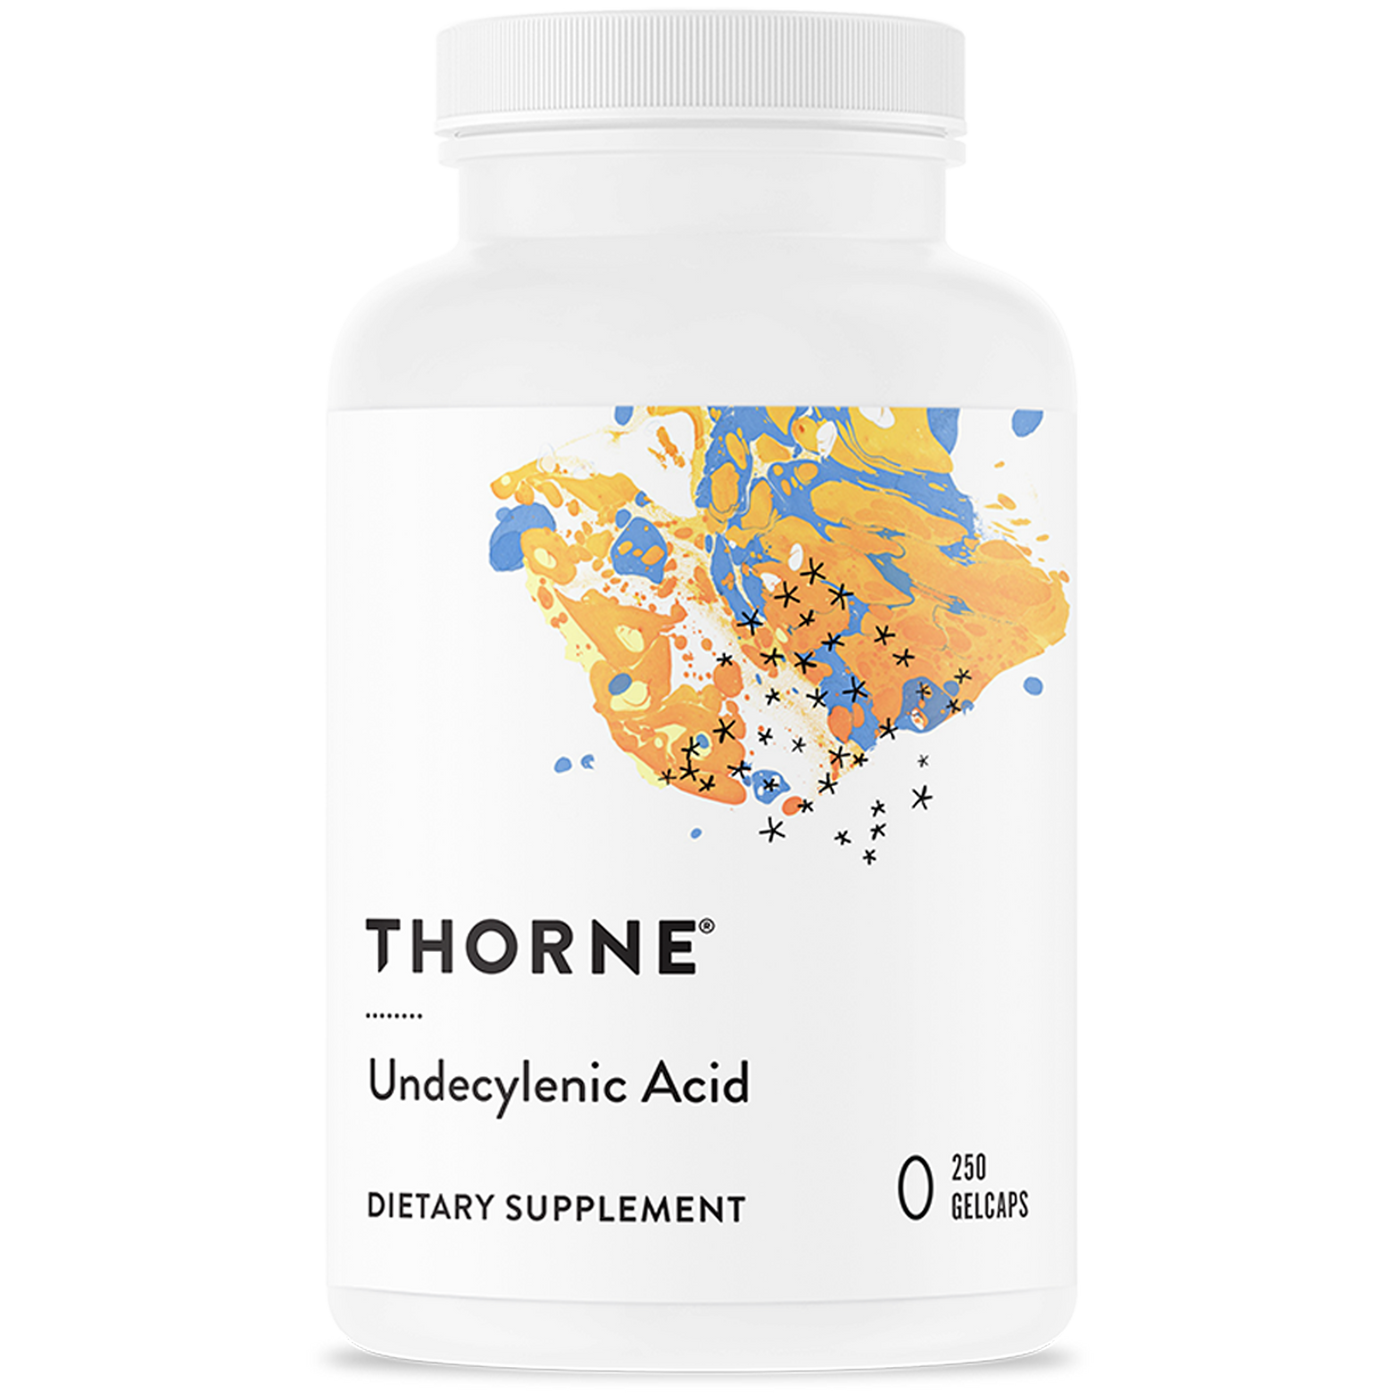 Undecylenic Acid 250 gelcaps Curated Wellness